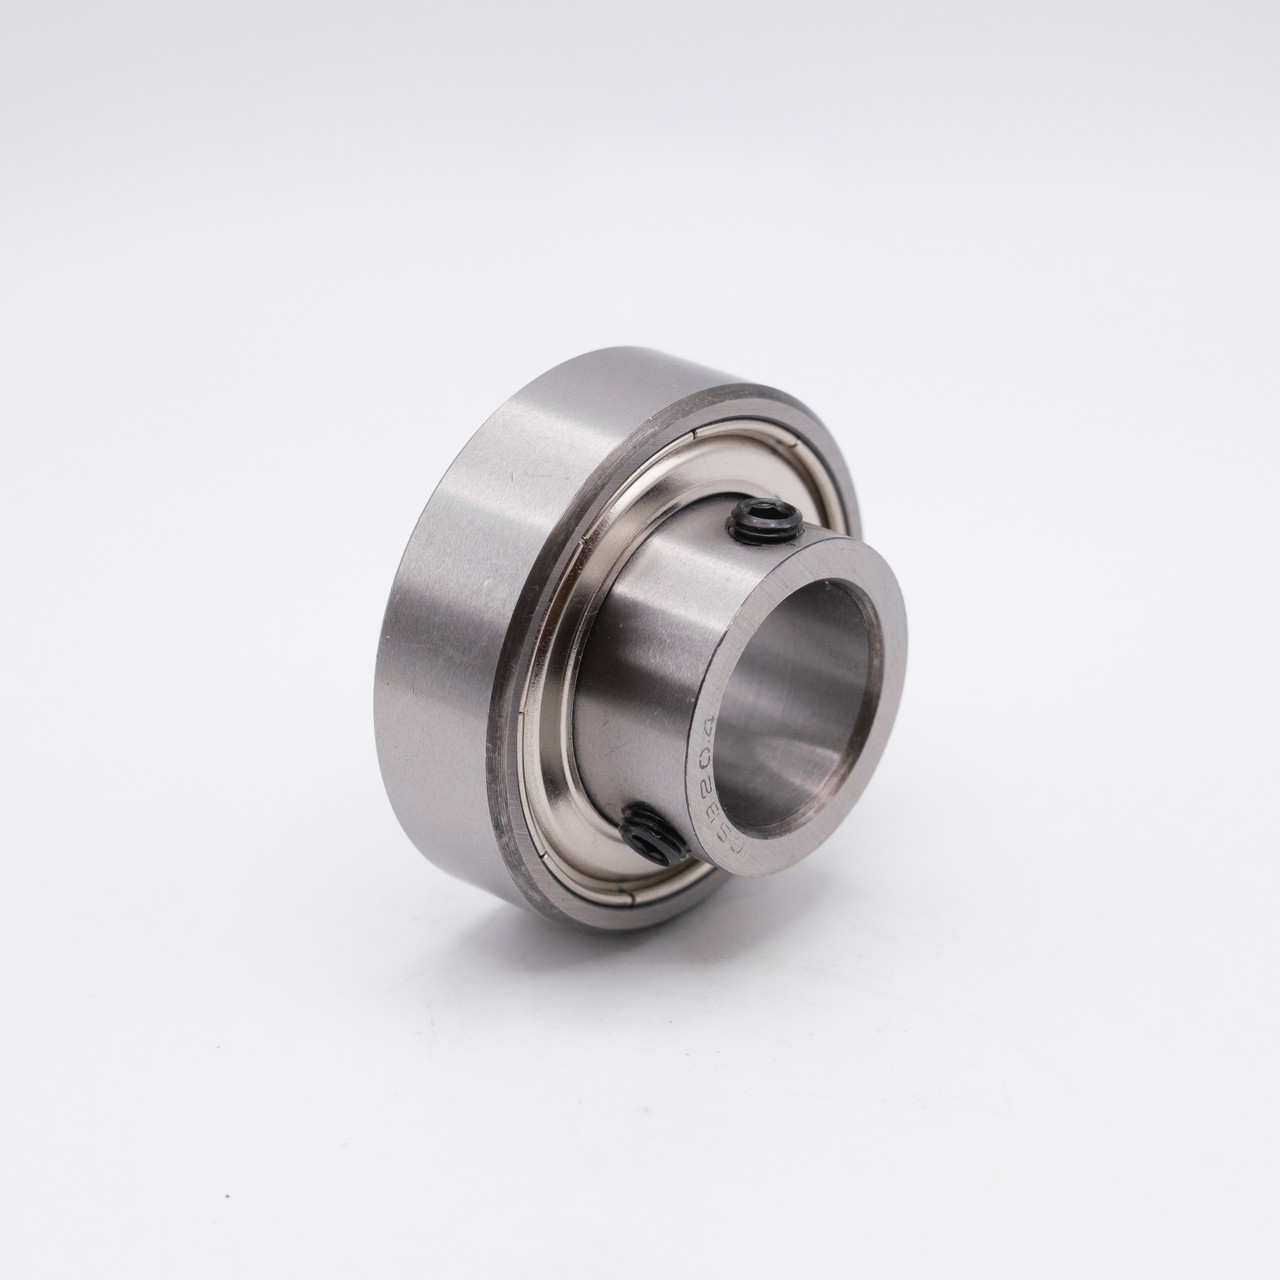 CSB206-19 Cylindrical Outer Insert Bearing 1-3/16x62x30 Side View